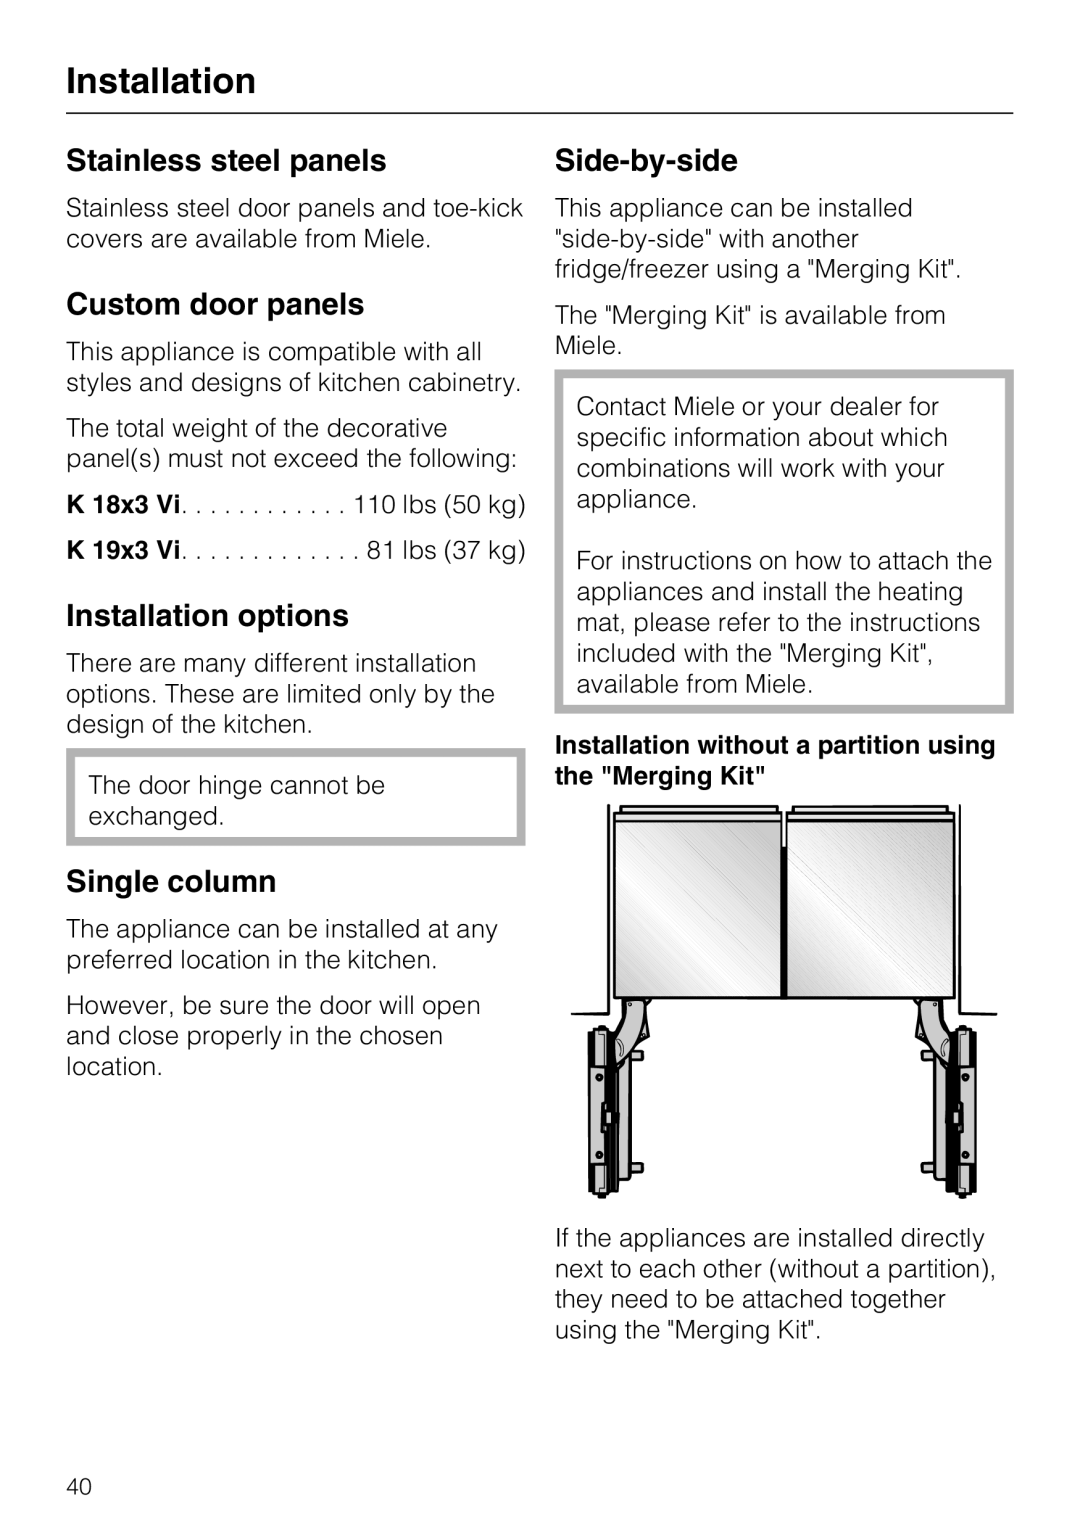 Miele 09 920 570 Stainless steel panels, Custom door panels, Installation options, Single column, Side-by-side 